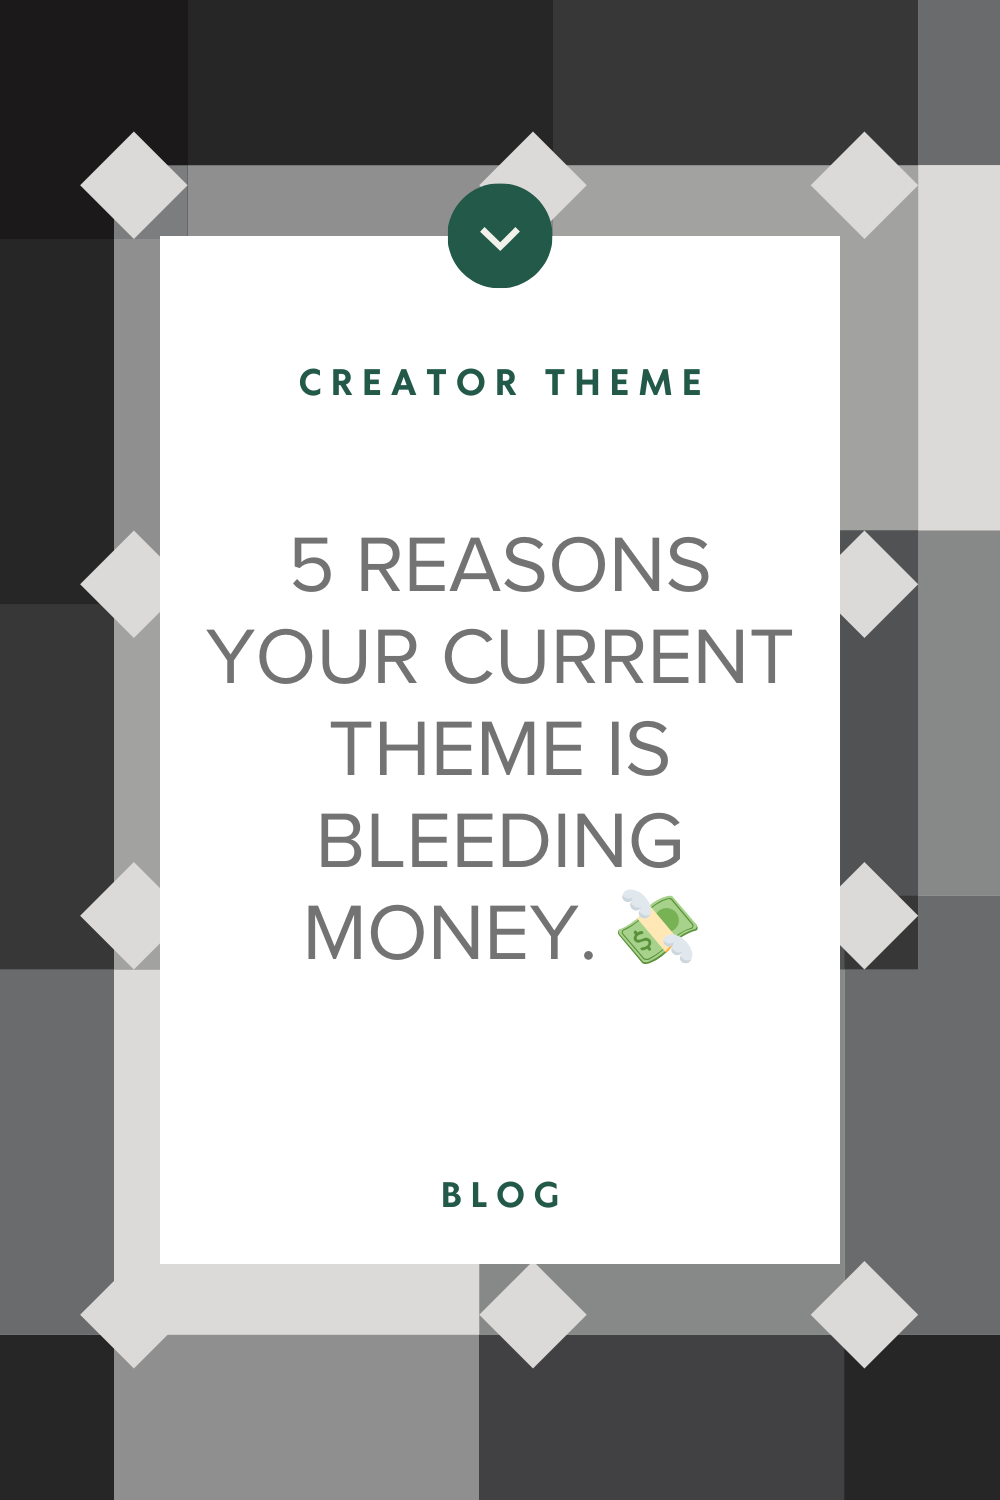 5 reasons your current theme is bleeding money. 💸